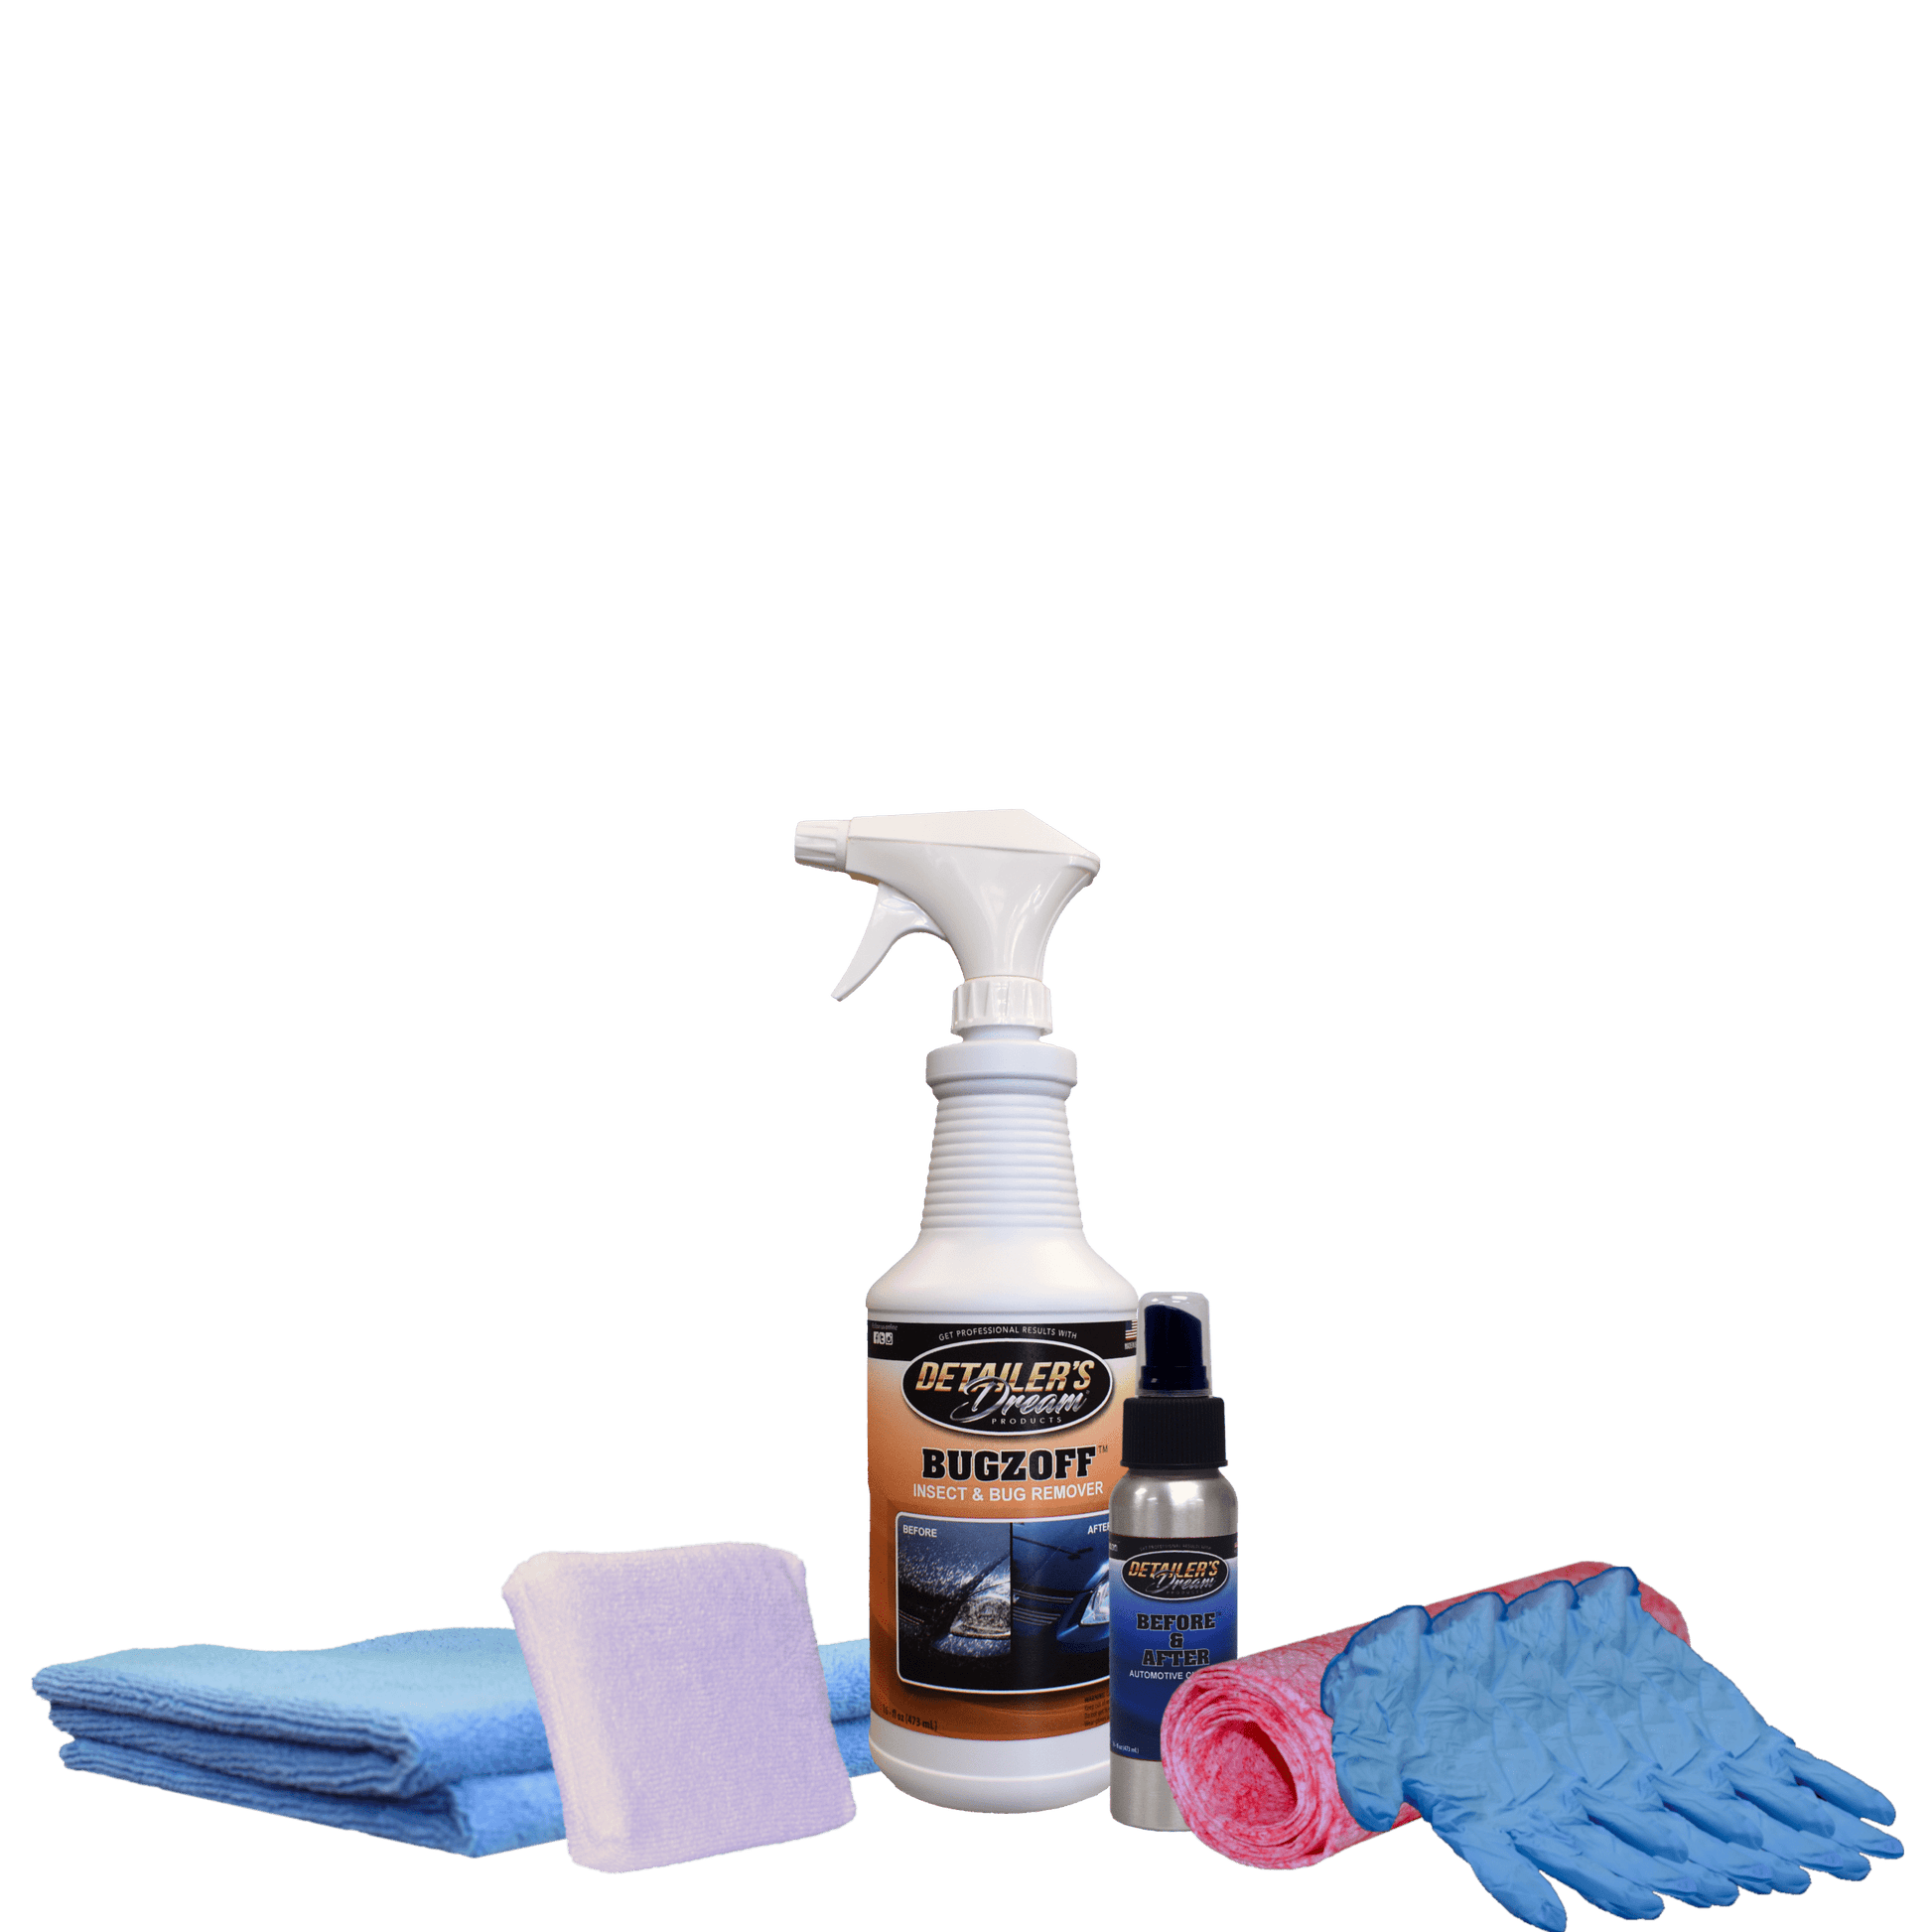 BUGZOFF™-Insect & Bug Remover-Detailer's Dream